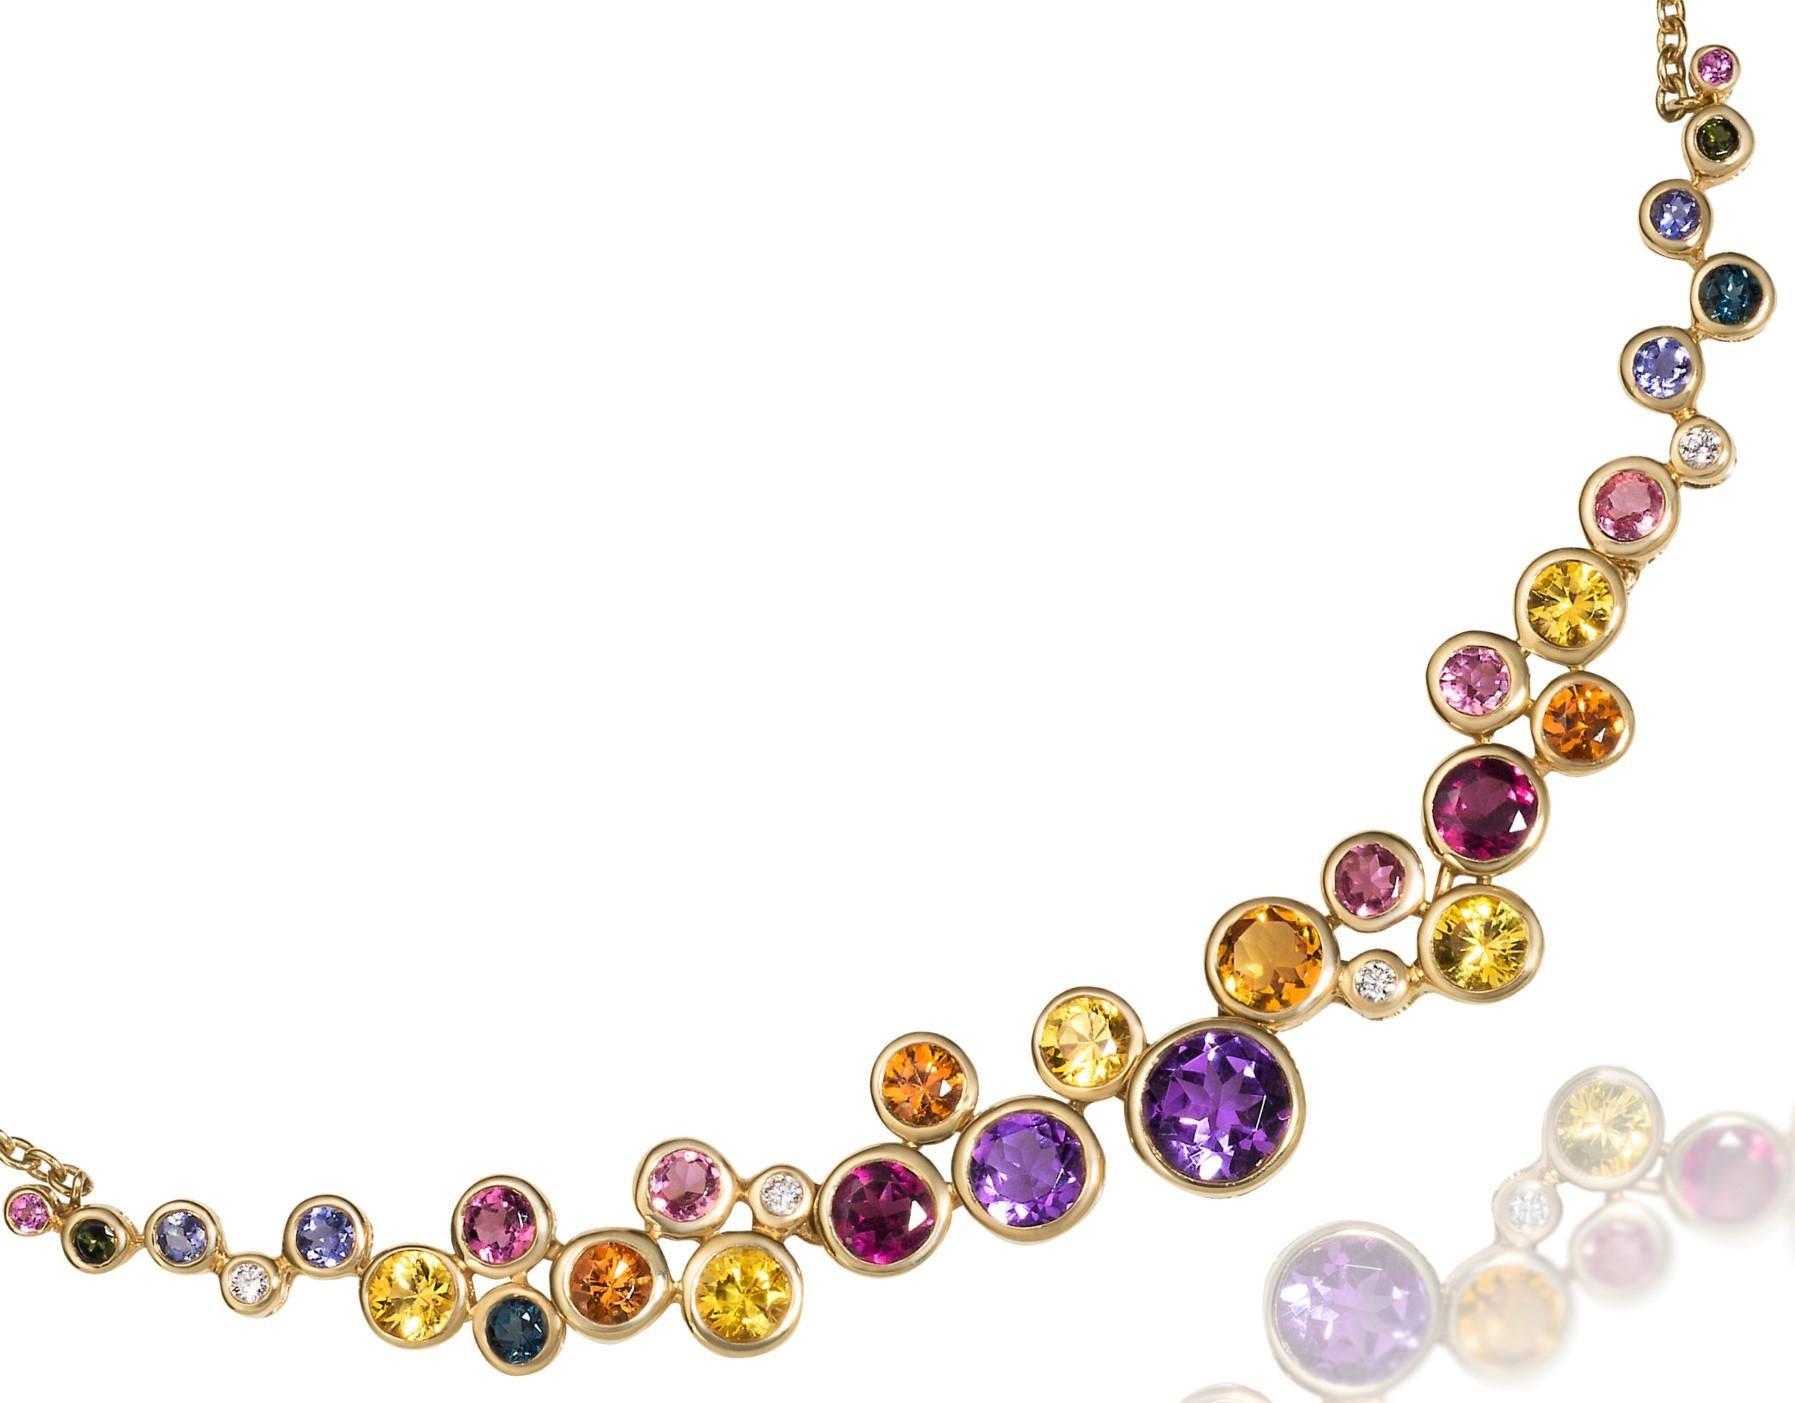 From the Shooting Stars collection, this is the Constellation necklace in 14ky  has over 6 ct of sparkling, round gemstones (amethysts, tourmalines, citrines, yellow sapphires, pink sapphires, blue topaz, iolites) and 0.042 ct of tiny diamonds.  It